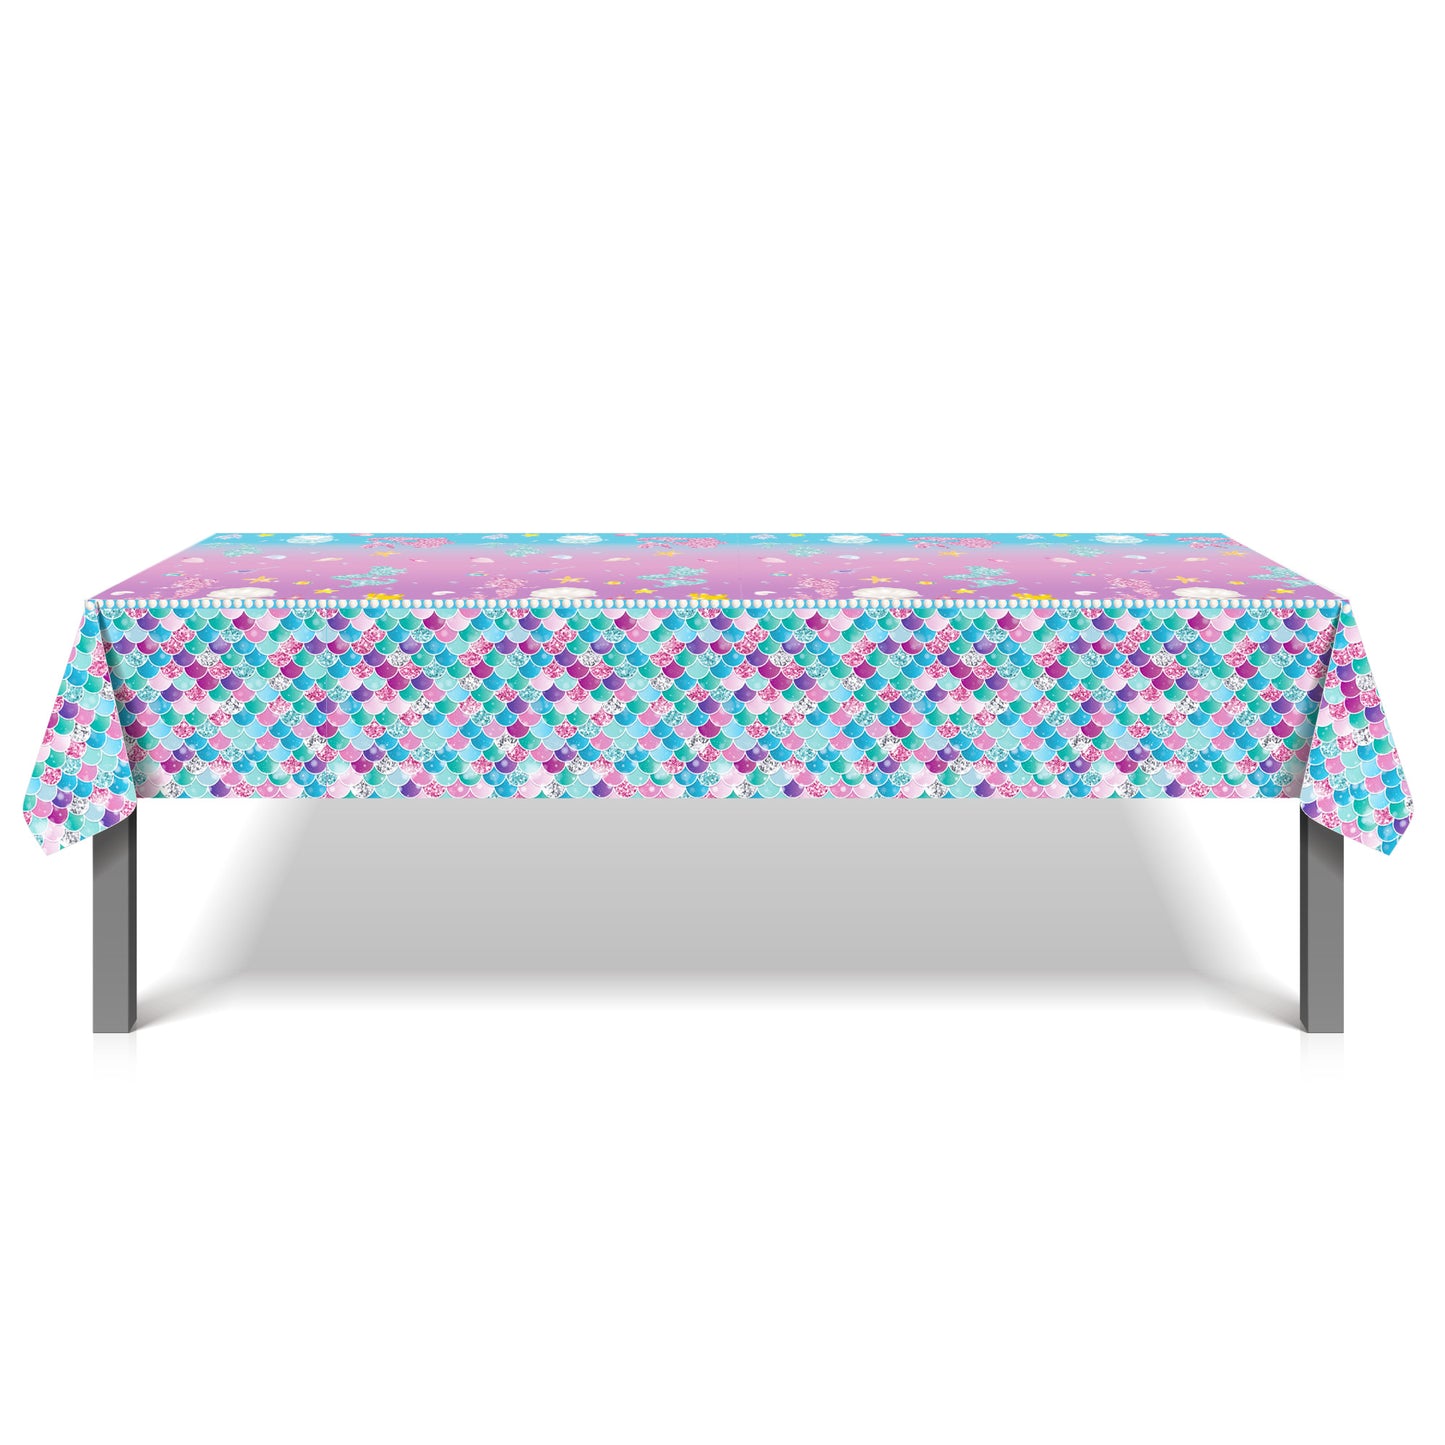 Party Like A Mermaid Table Cover